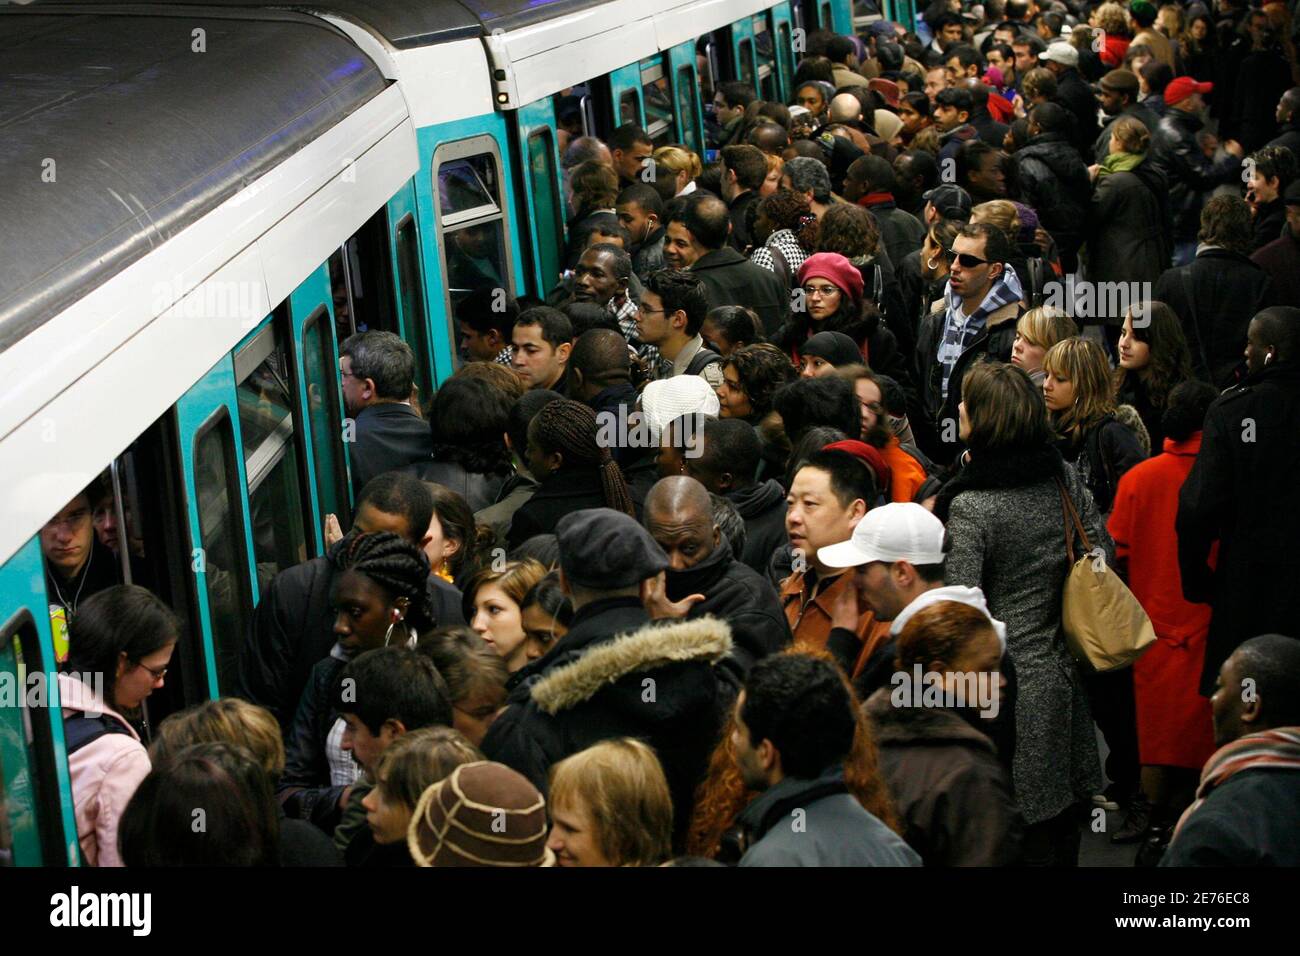 Commuters crowd into a metro at Gare de l'Est subway station in Paris November 22, 2007, during a nationwide strike by French transport workers to protest against a pensions reform. French commuters faced another day of transport delays on Thursday but there was growing hope that an end was in sight to a nine-day strike to protest one of President Nicolas Sarkozy's key economic reforms.      REUTERS/Benoit Tessier (FRANCE) Stock Photo